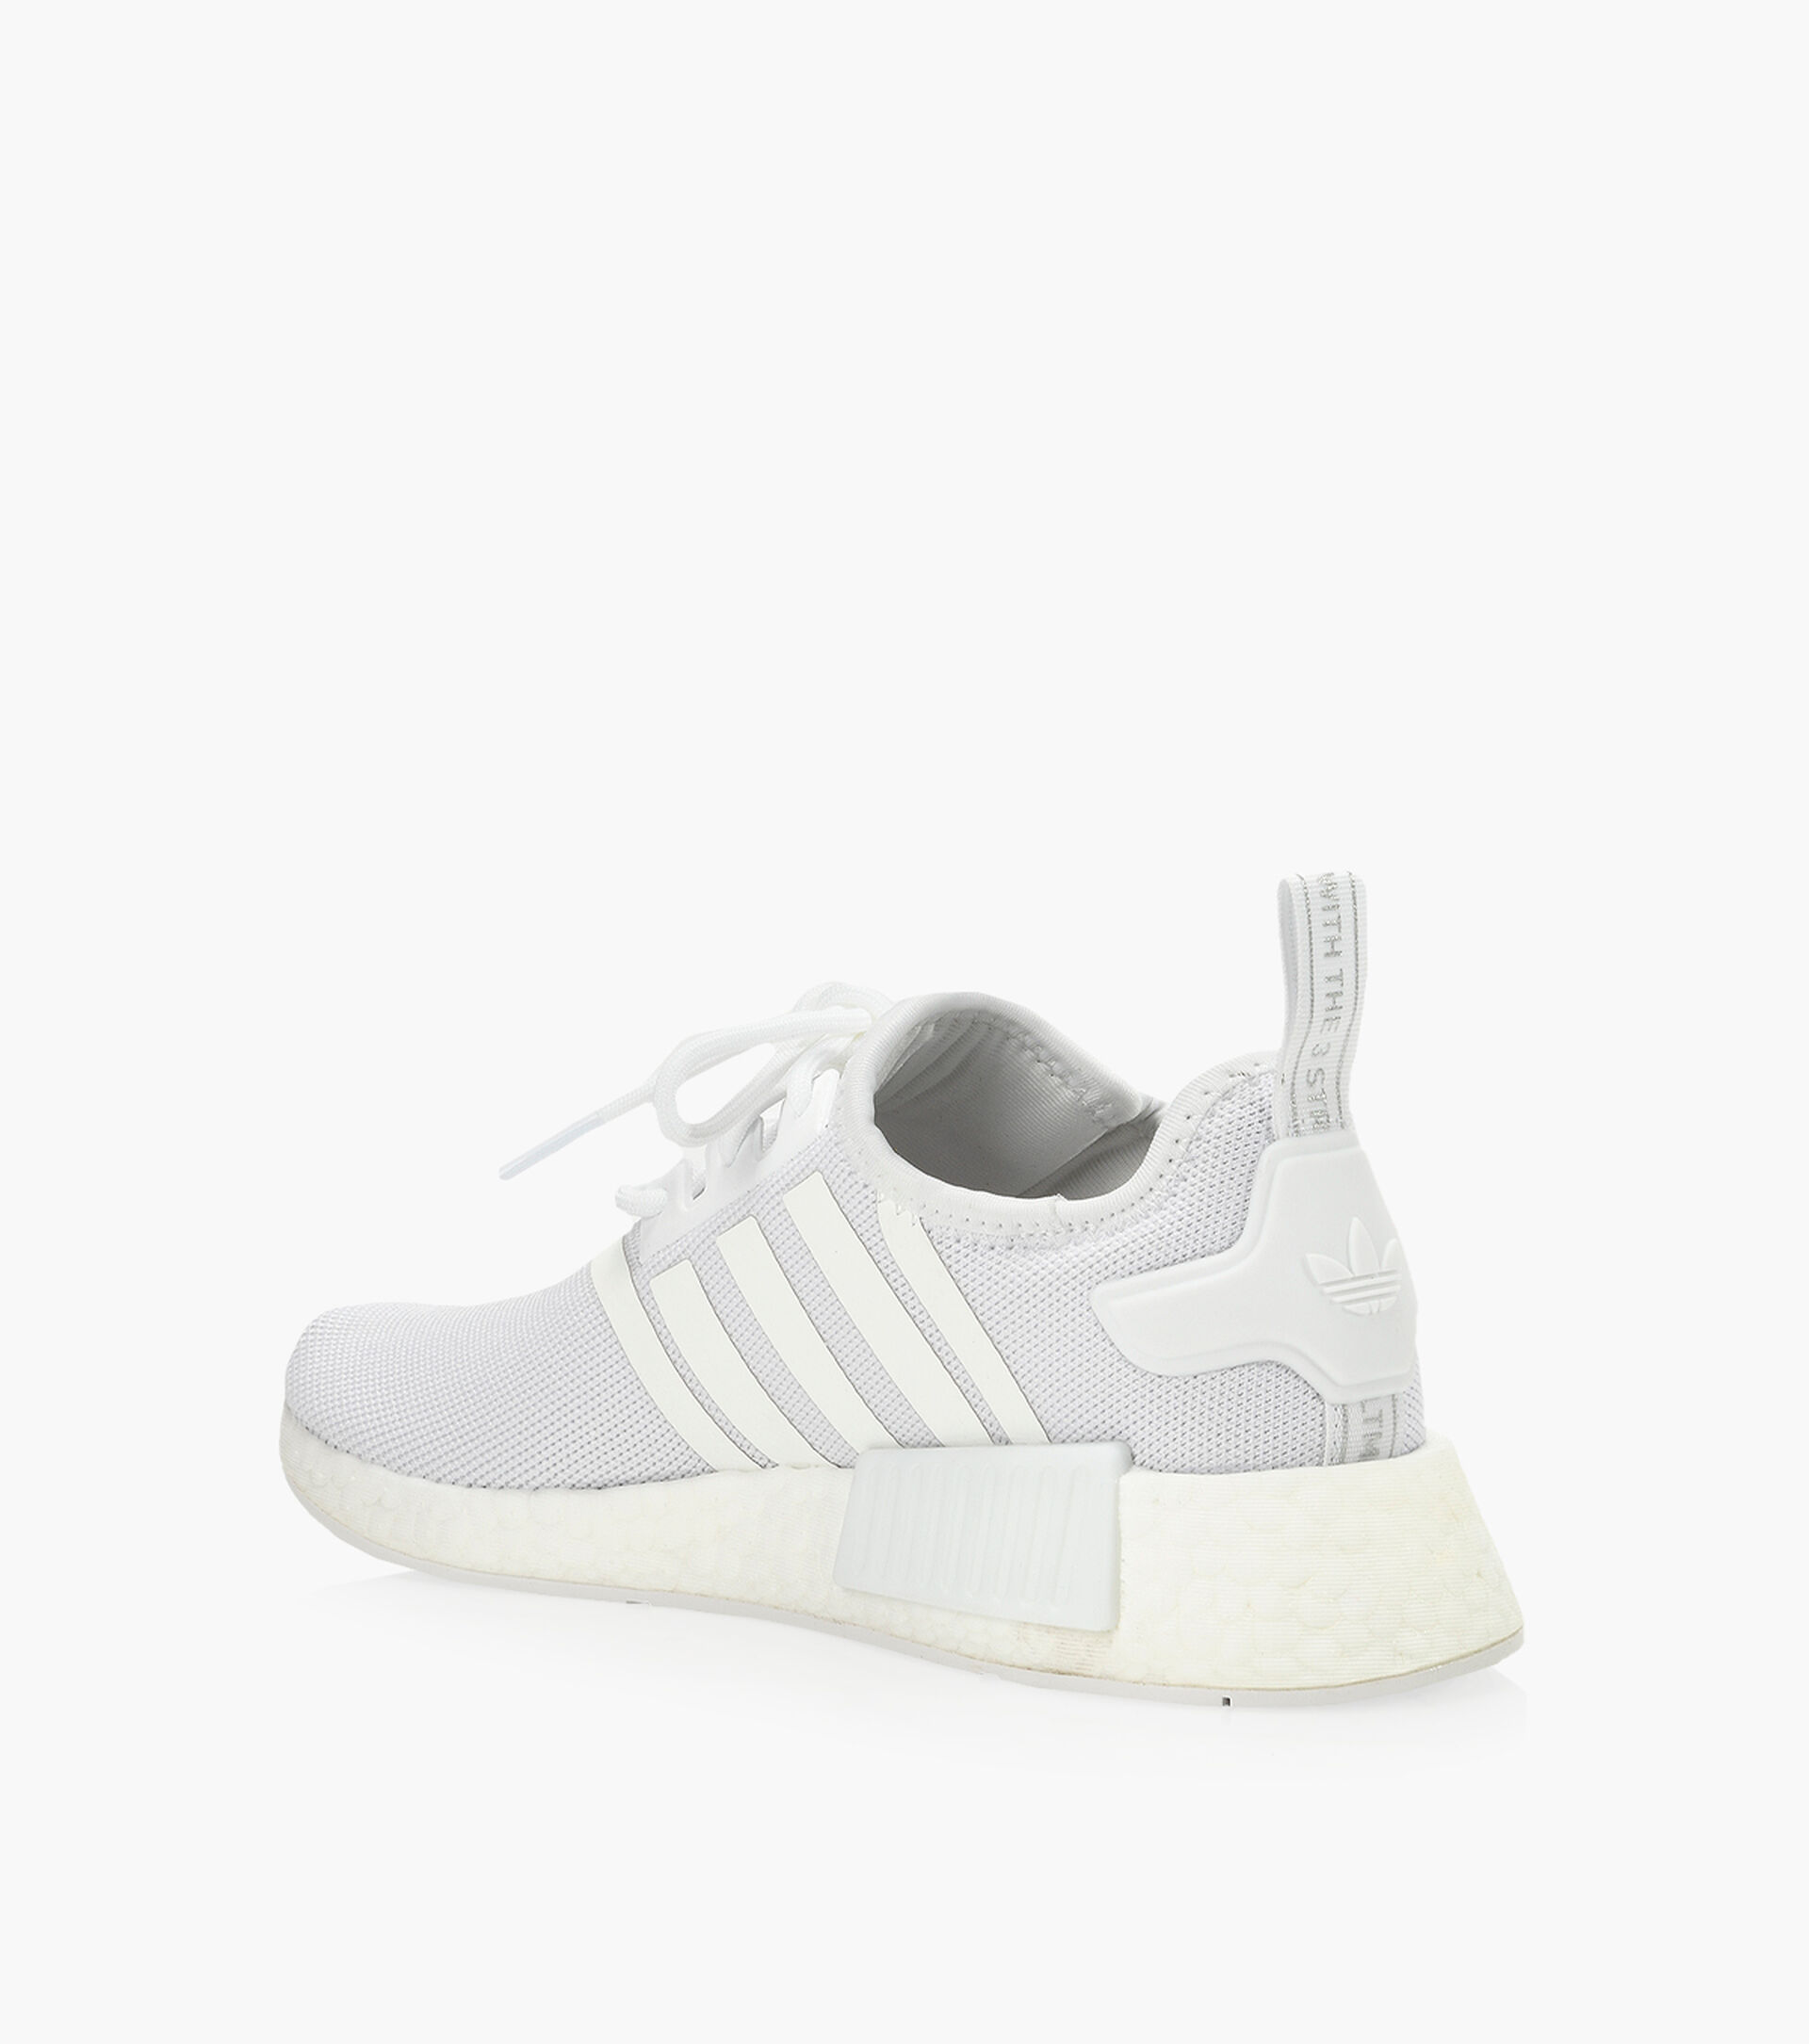 ADIDAS NMD_R1 PRIMEBLUE SHOES - White Fabric | Browns Shoes